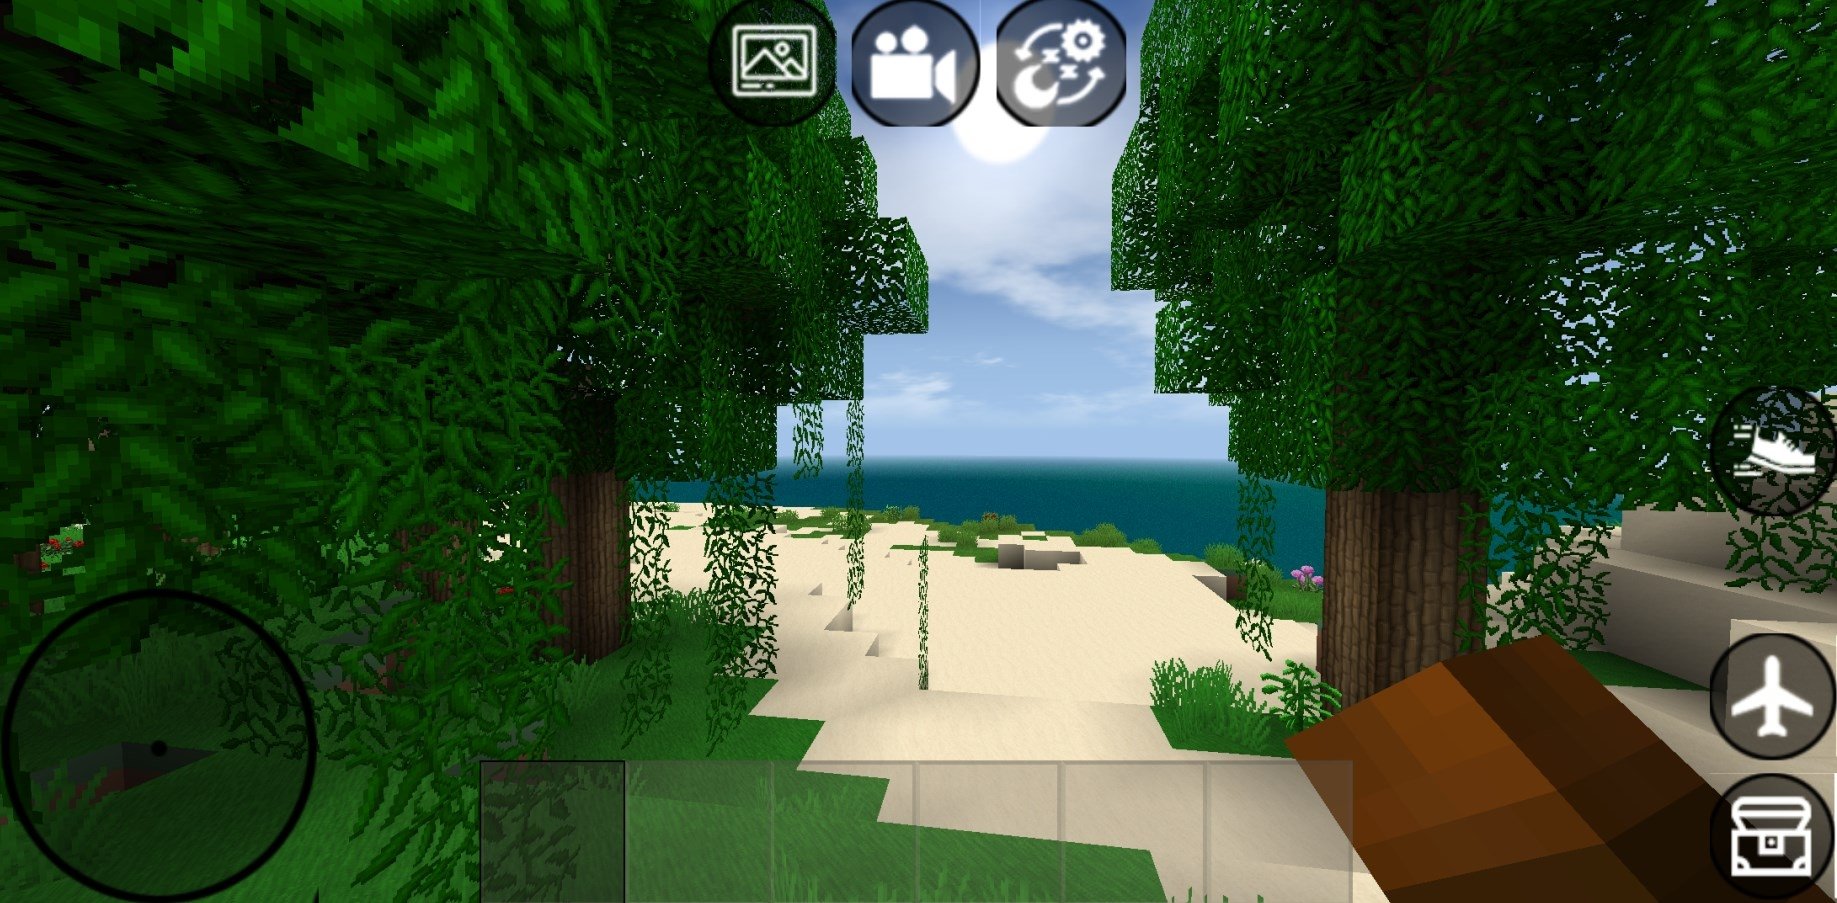 block craft 3d for pc